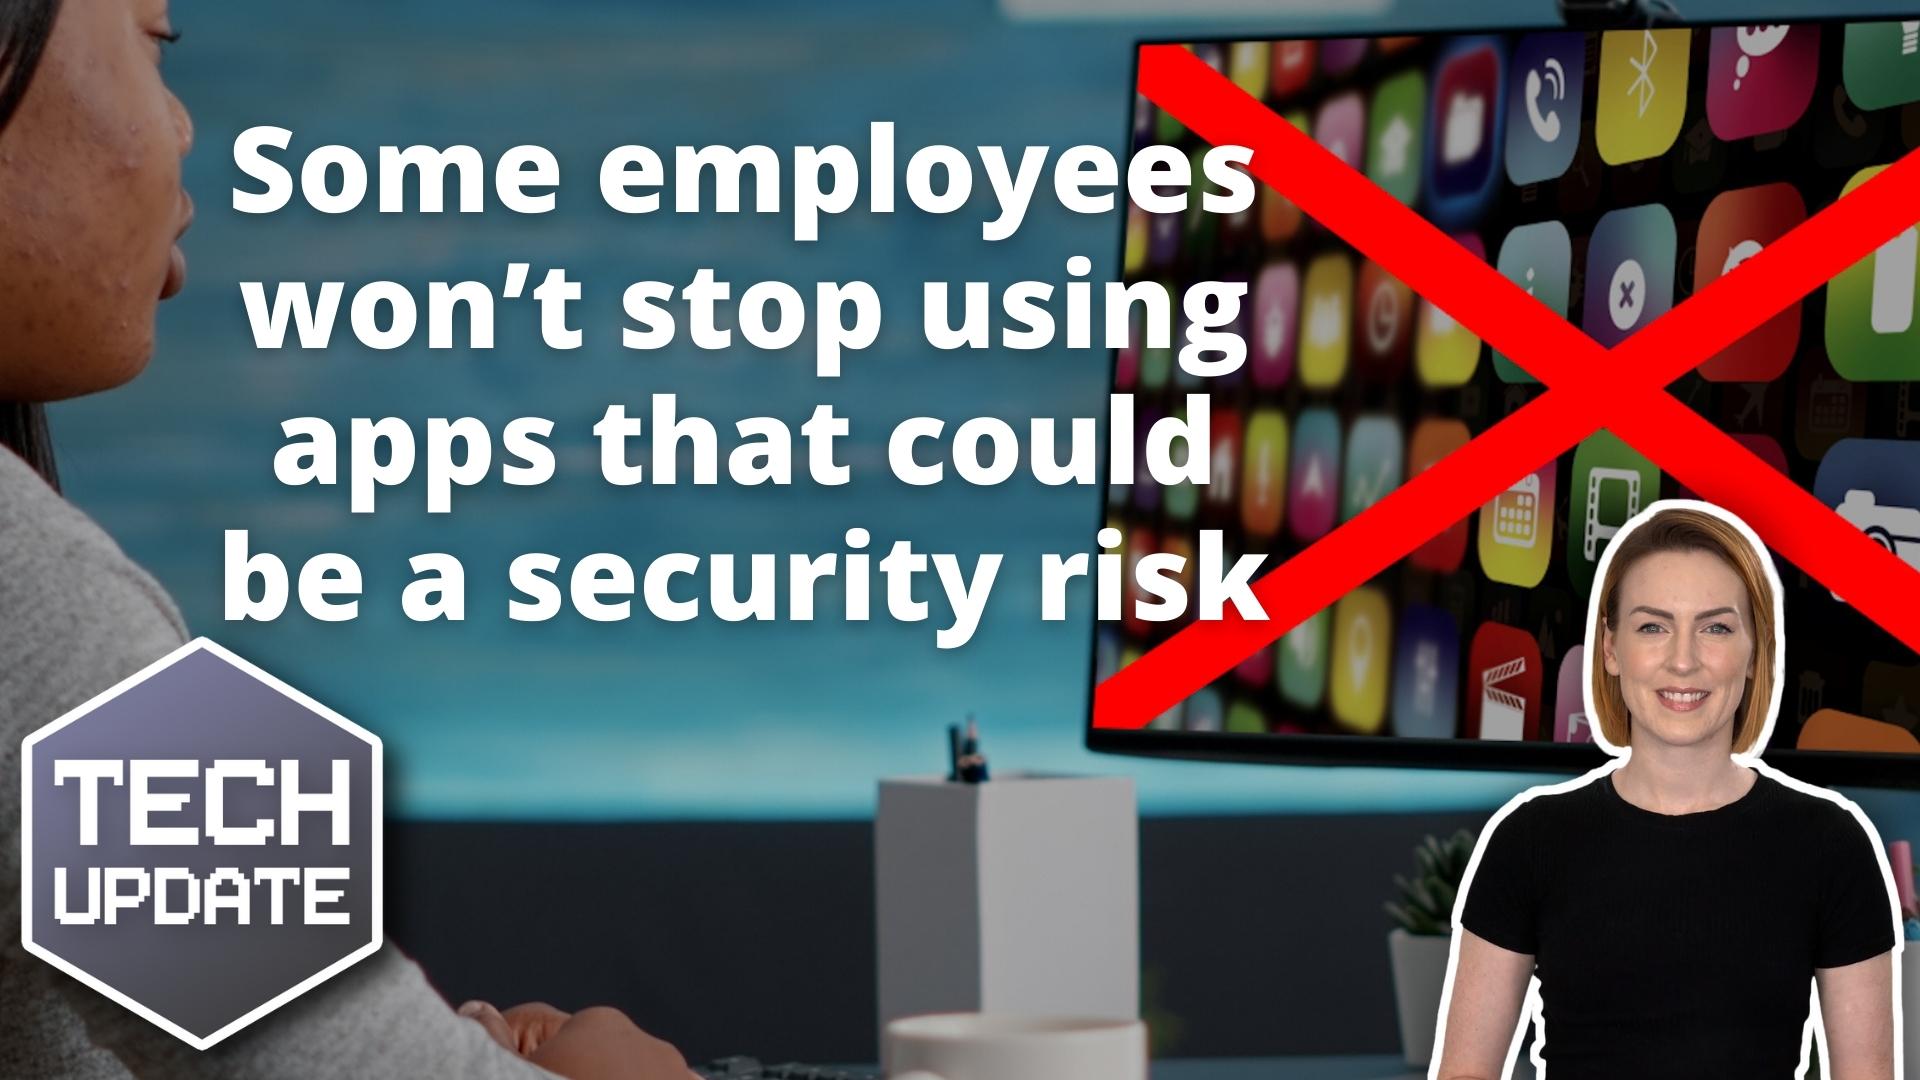 Are some Apps a Security Risk?